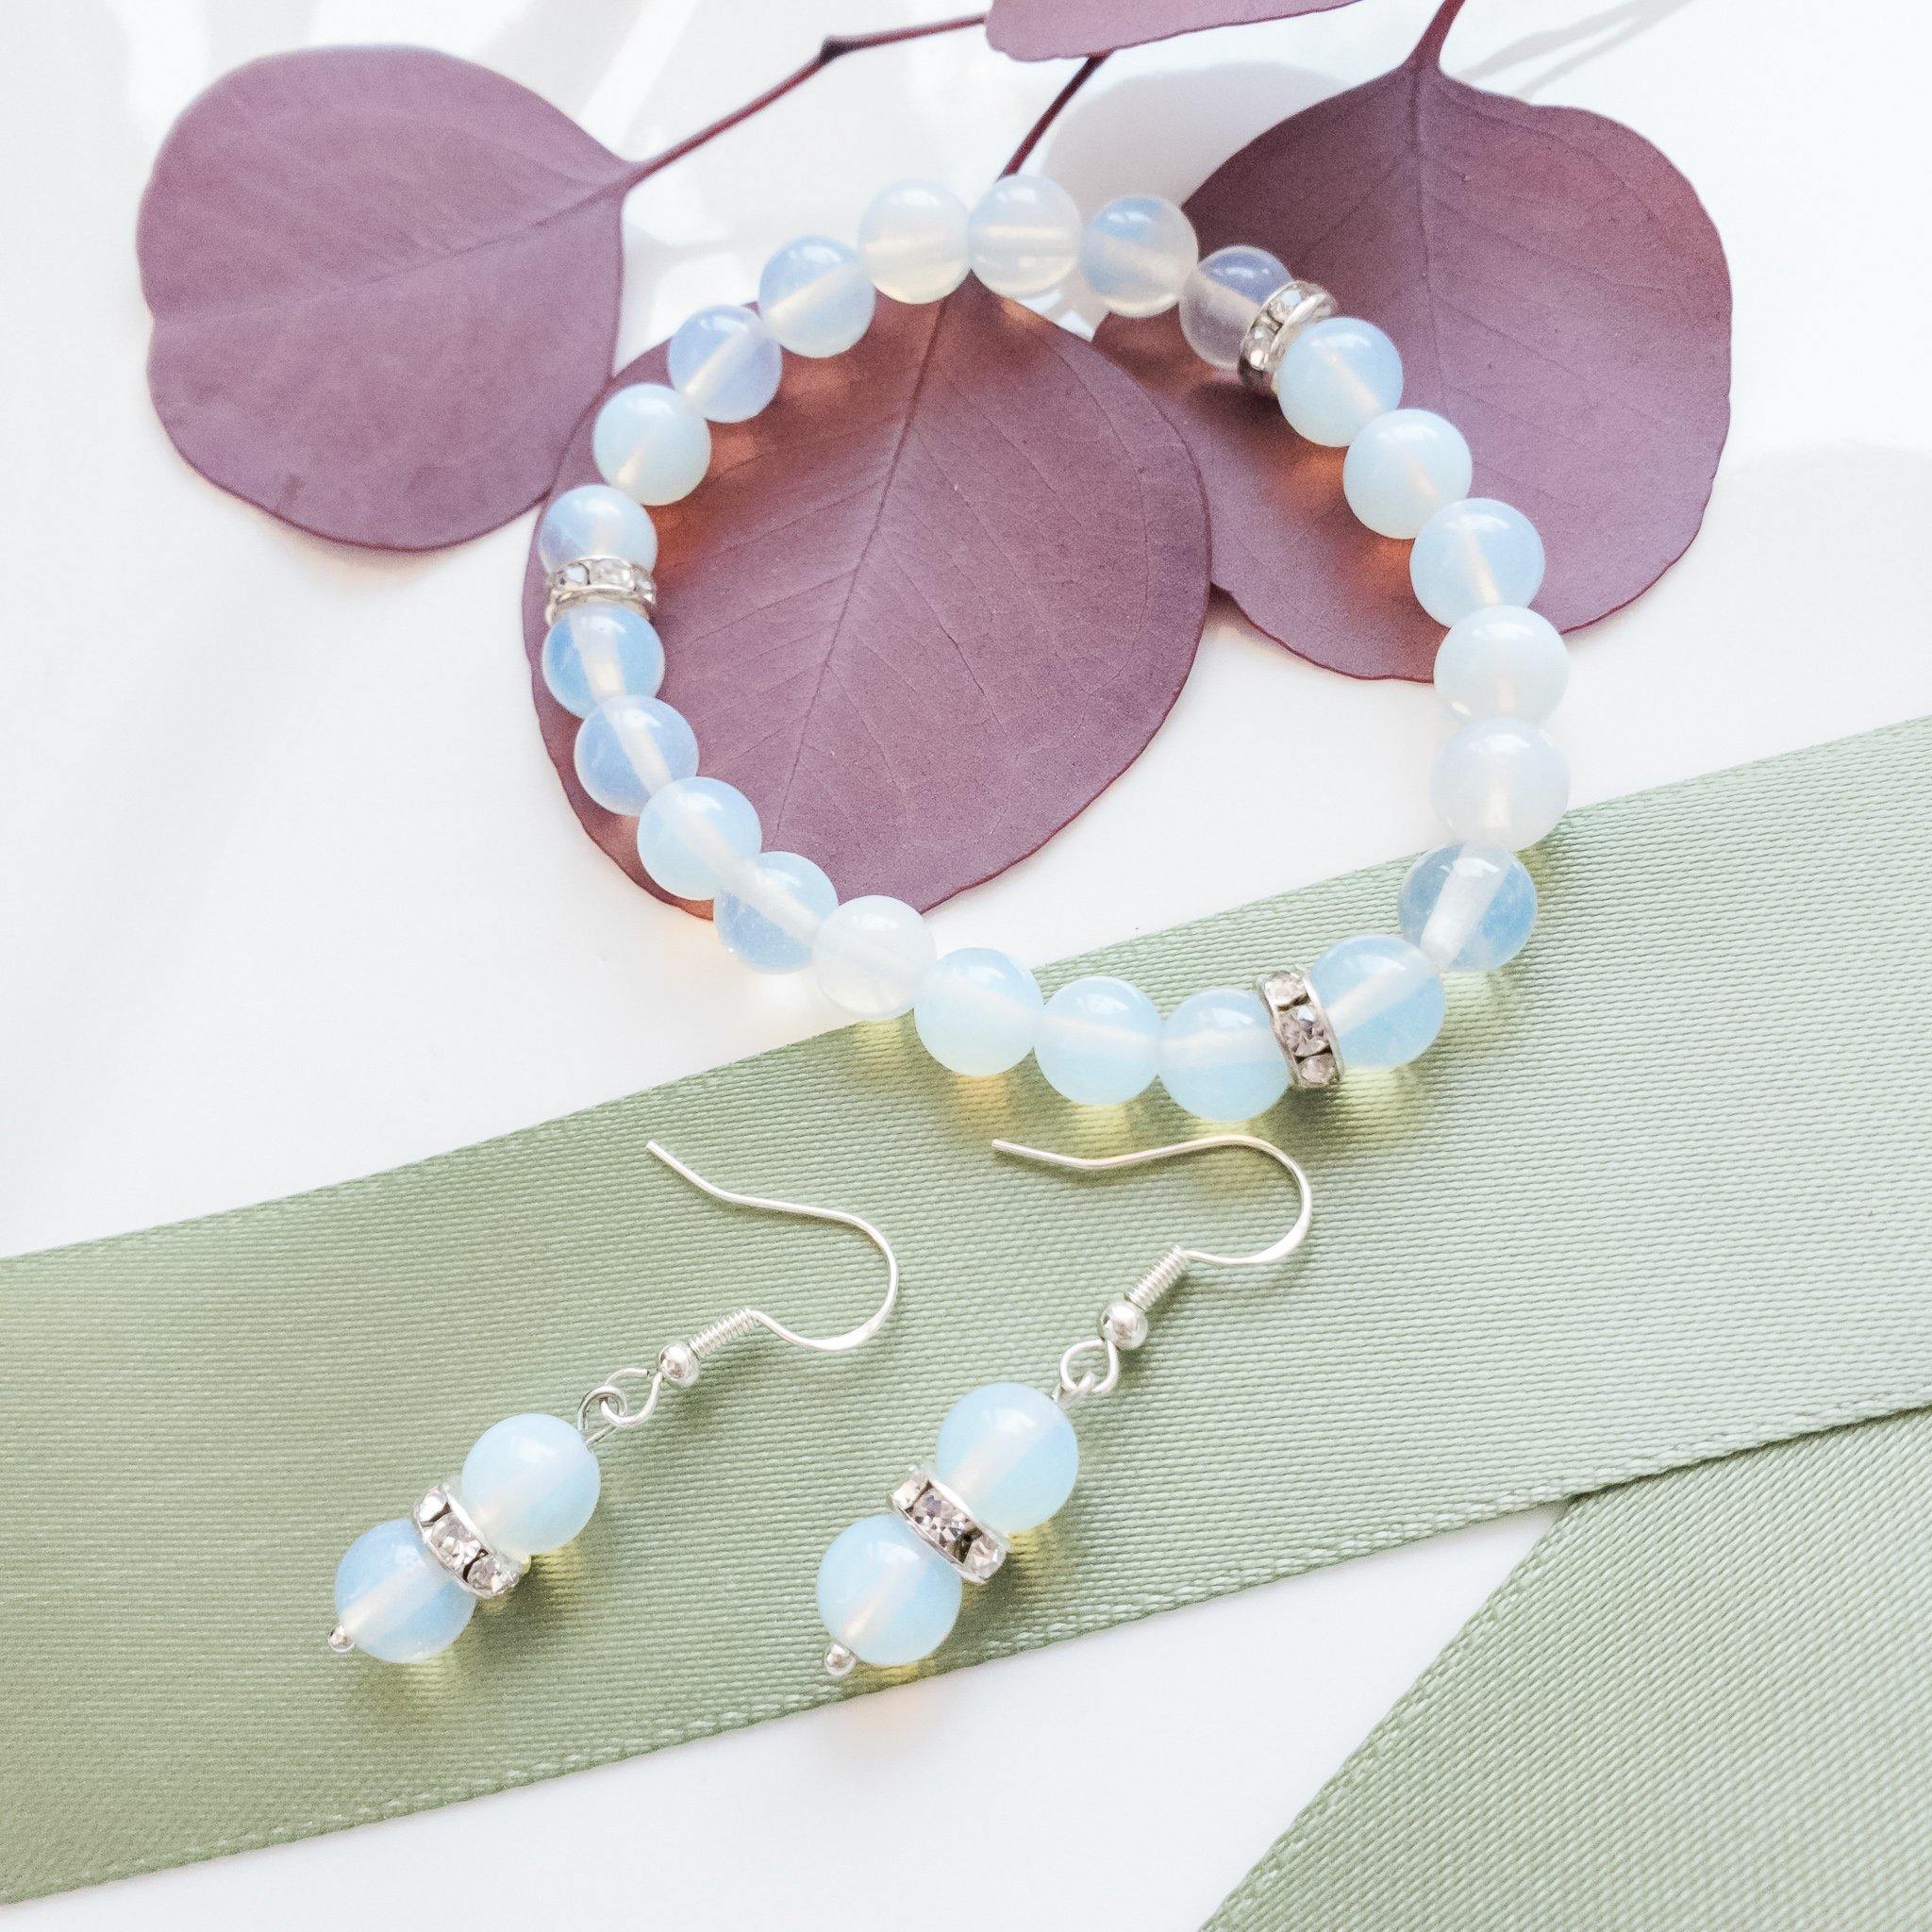 Elegant Opalite Bracelet and dangle Earrings with Cubic Zirconia Accents - front view - BellaChel Jeweler